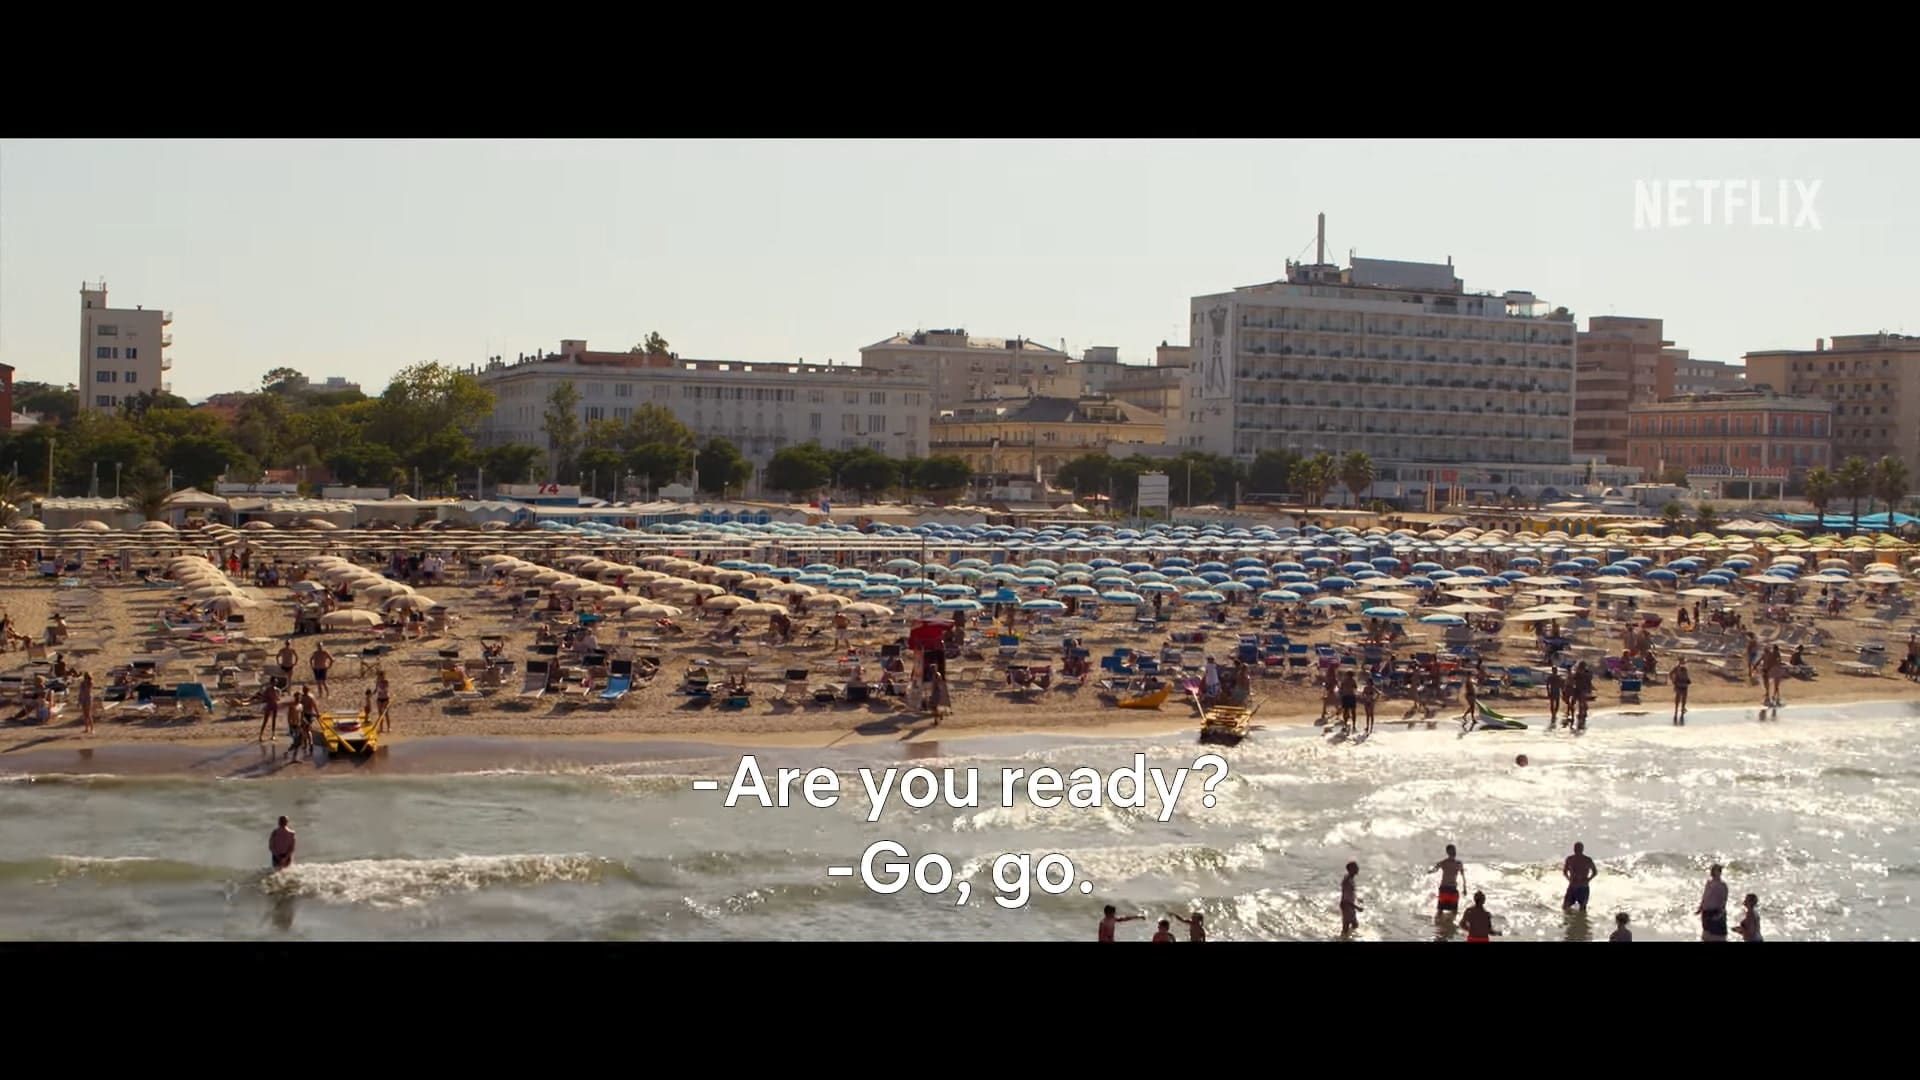 Netflix Under the Riccione Sun Trailer, Netflix Comedy Movies, Netflix Romantic Comedy, Coming to Netflix in July 2020